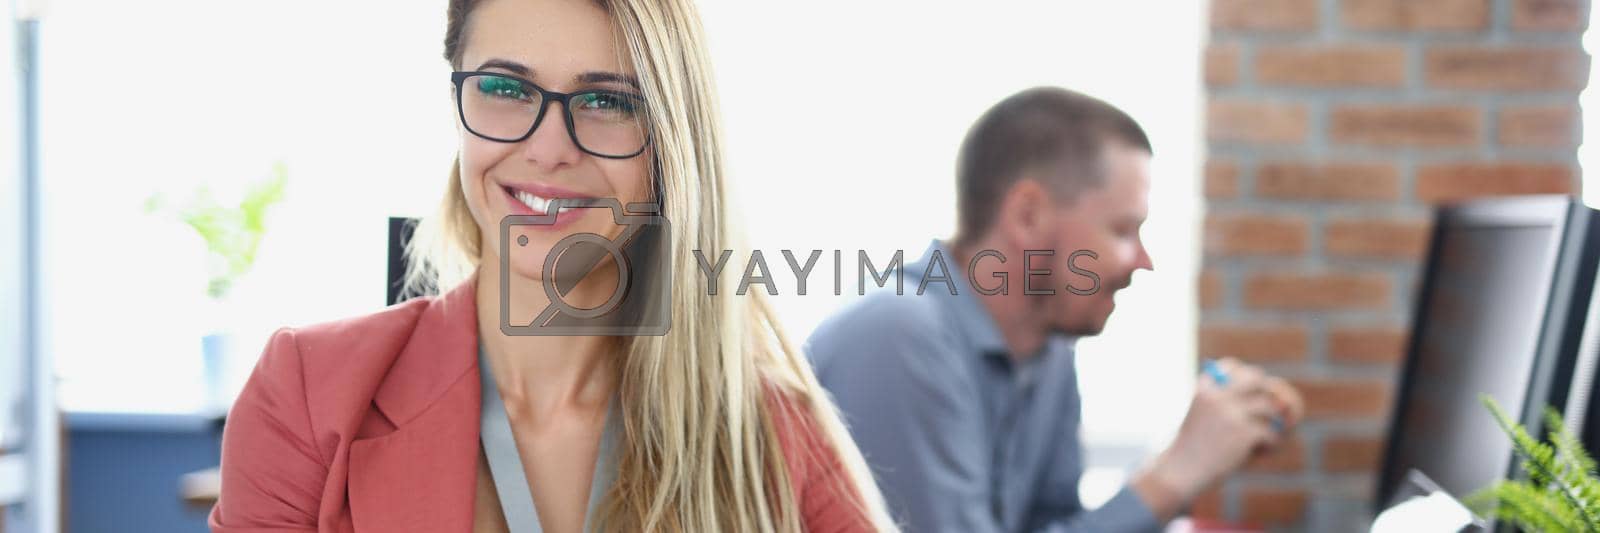 Royalty free image of Smiling and professional company worker by kuprevich